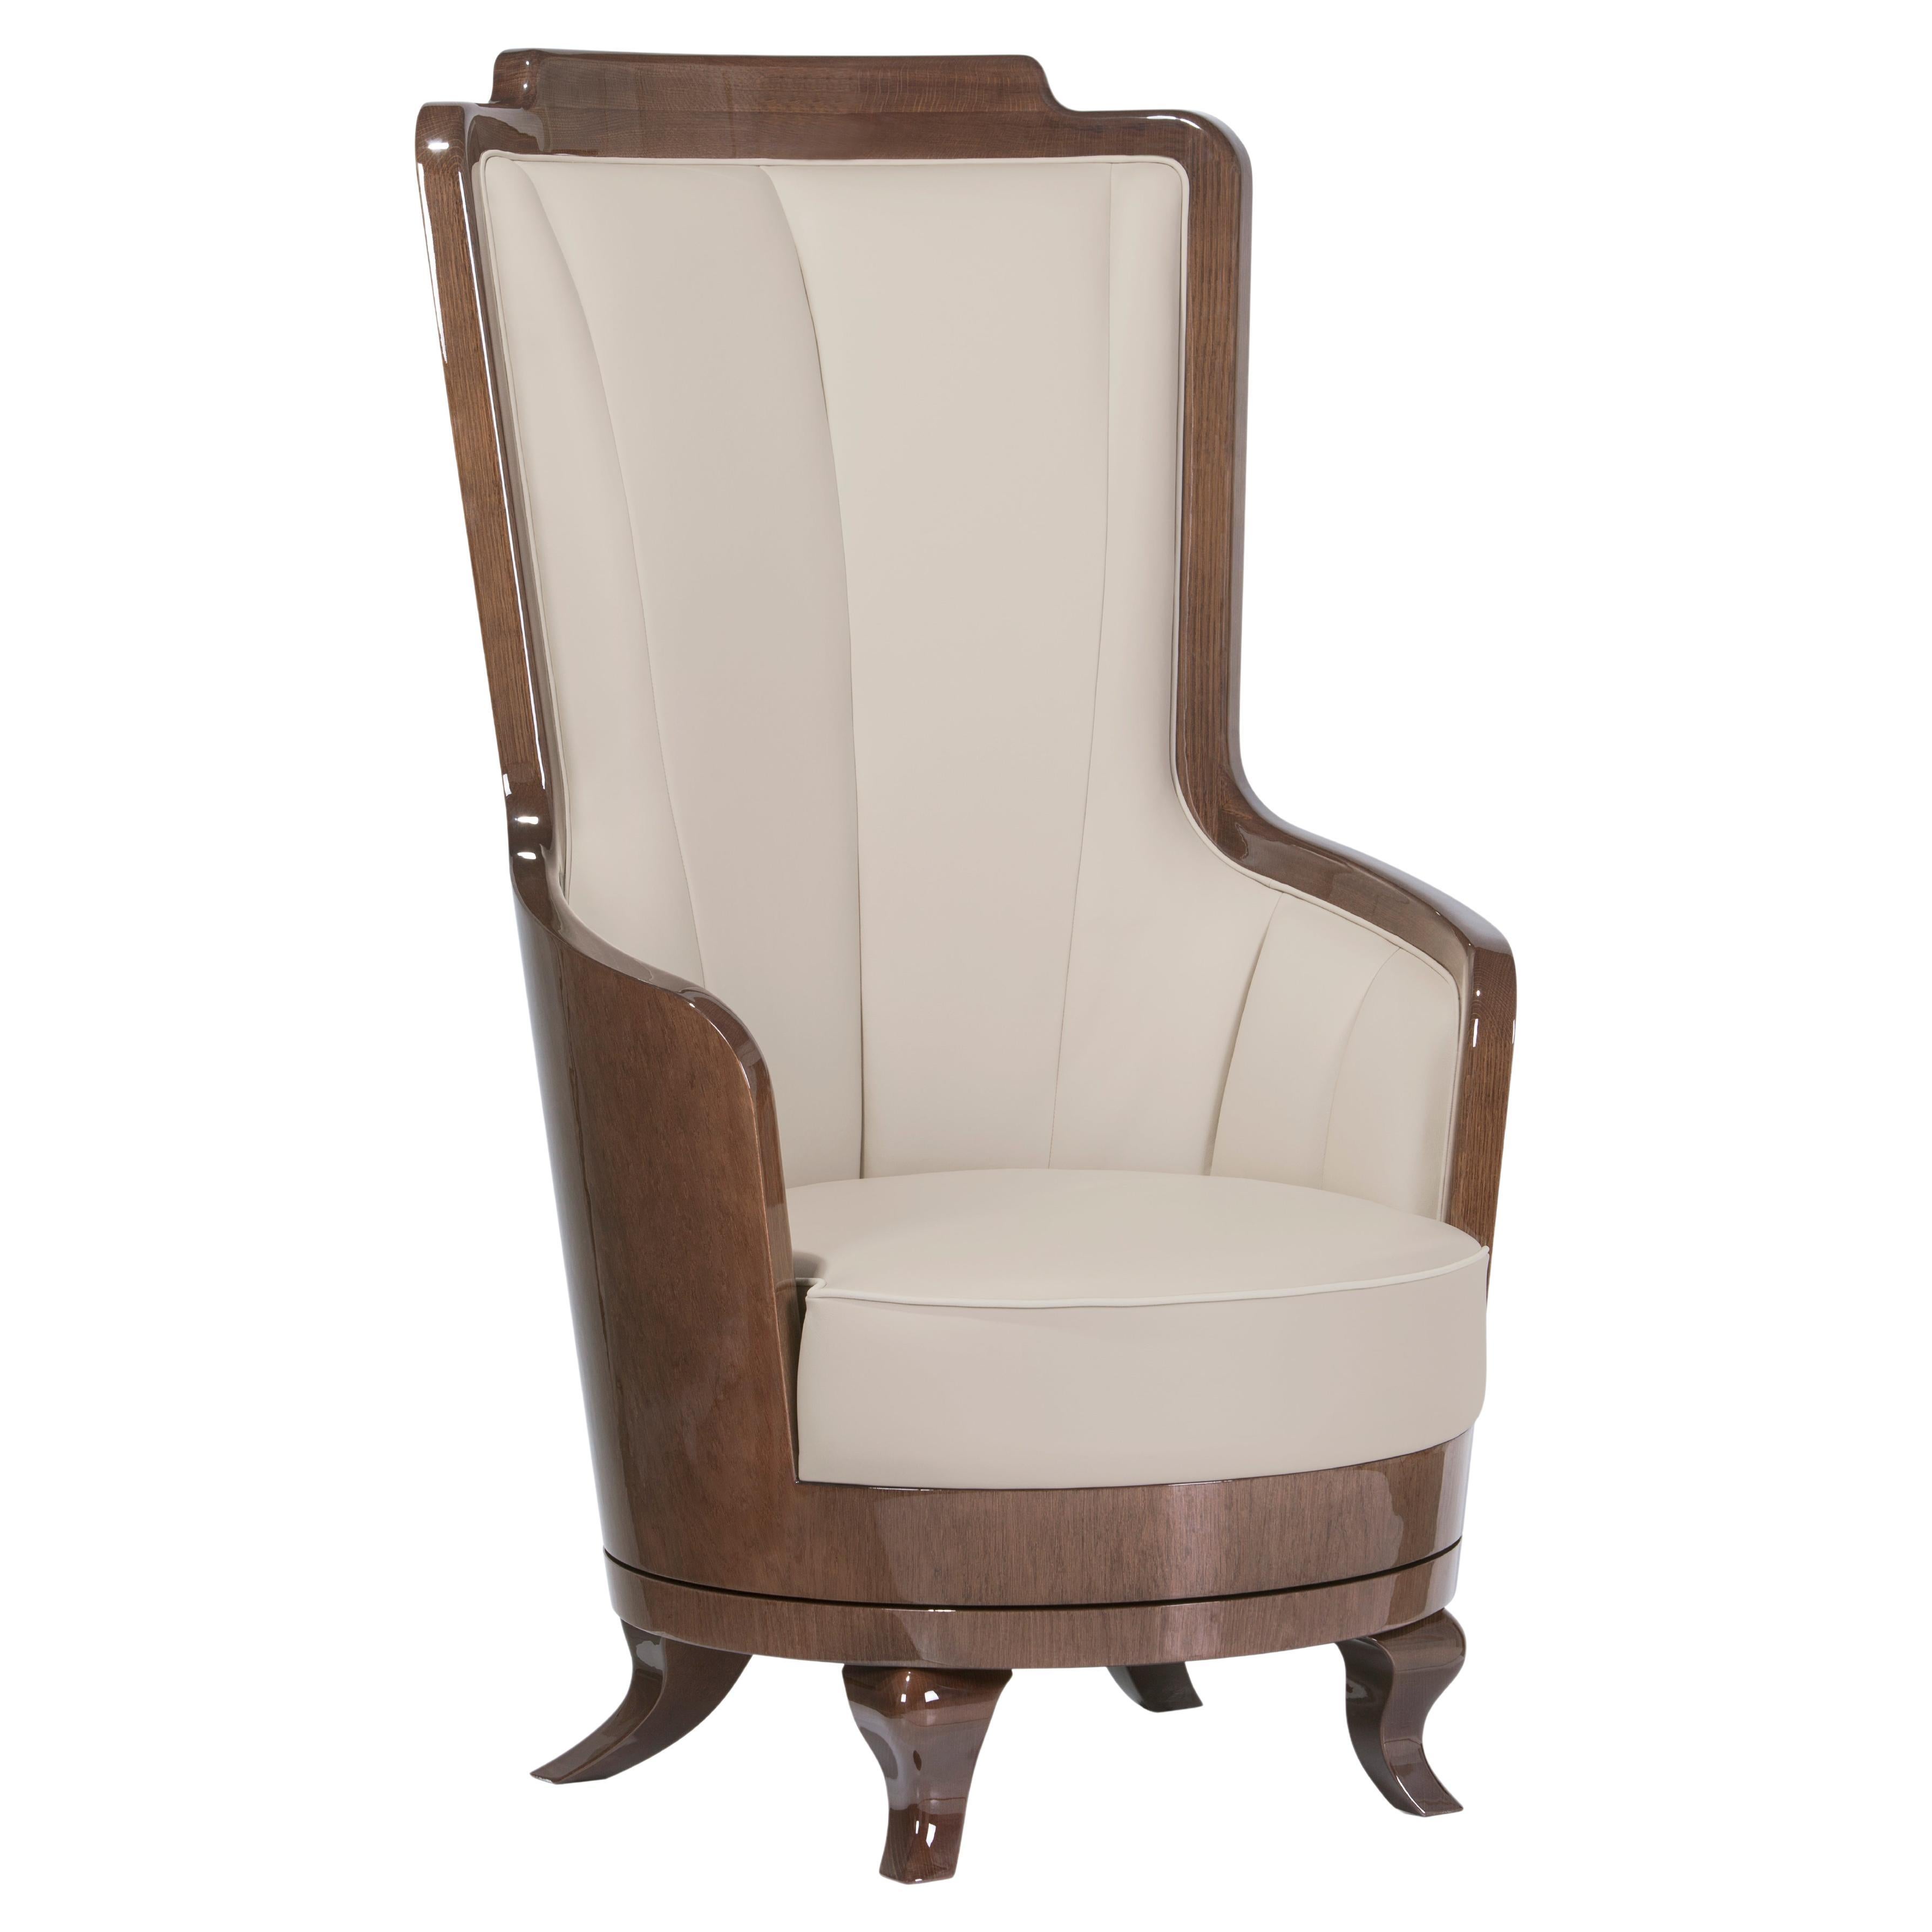 Modern Fernando Armchair Upholstered in Beige Leather Handcrafted by Greenapple